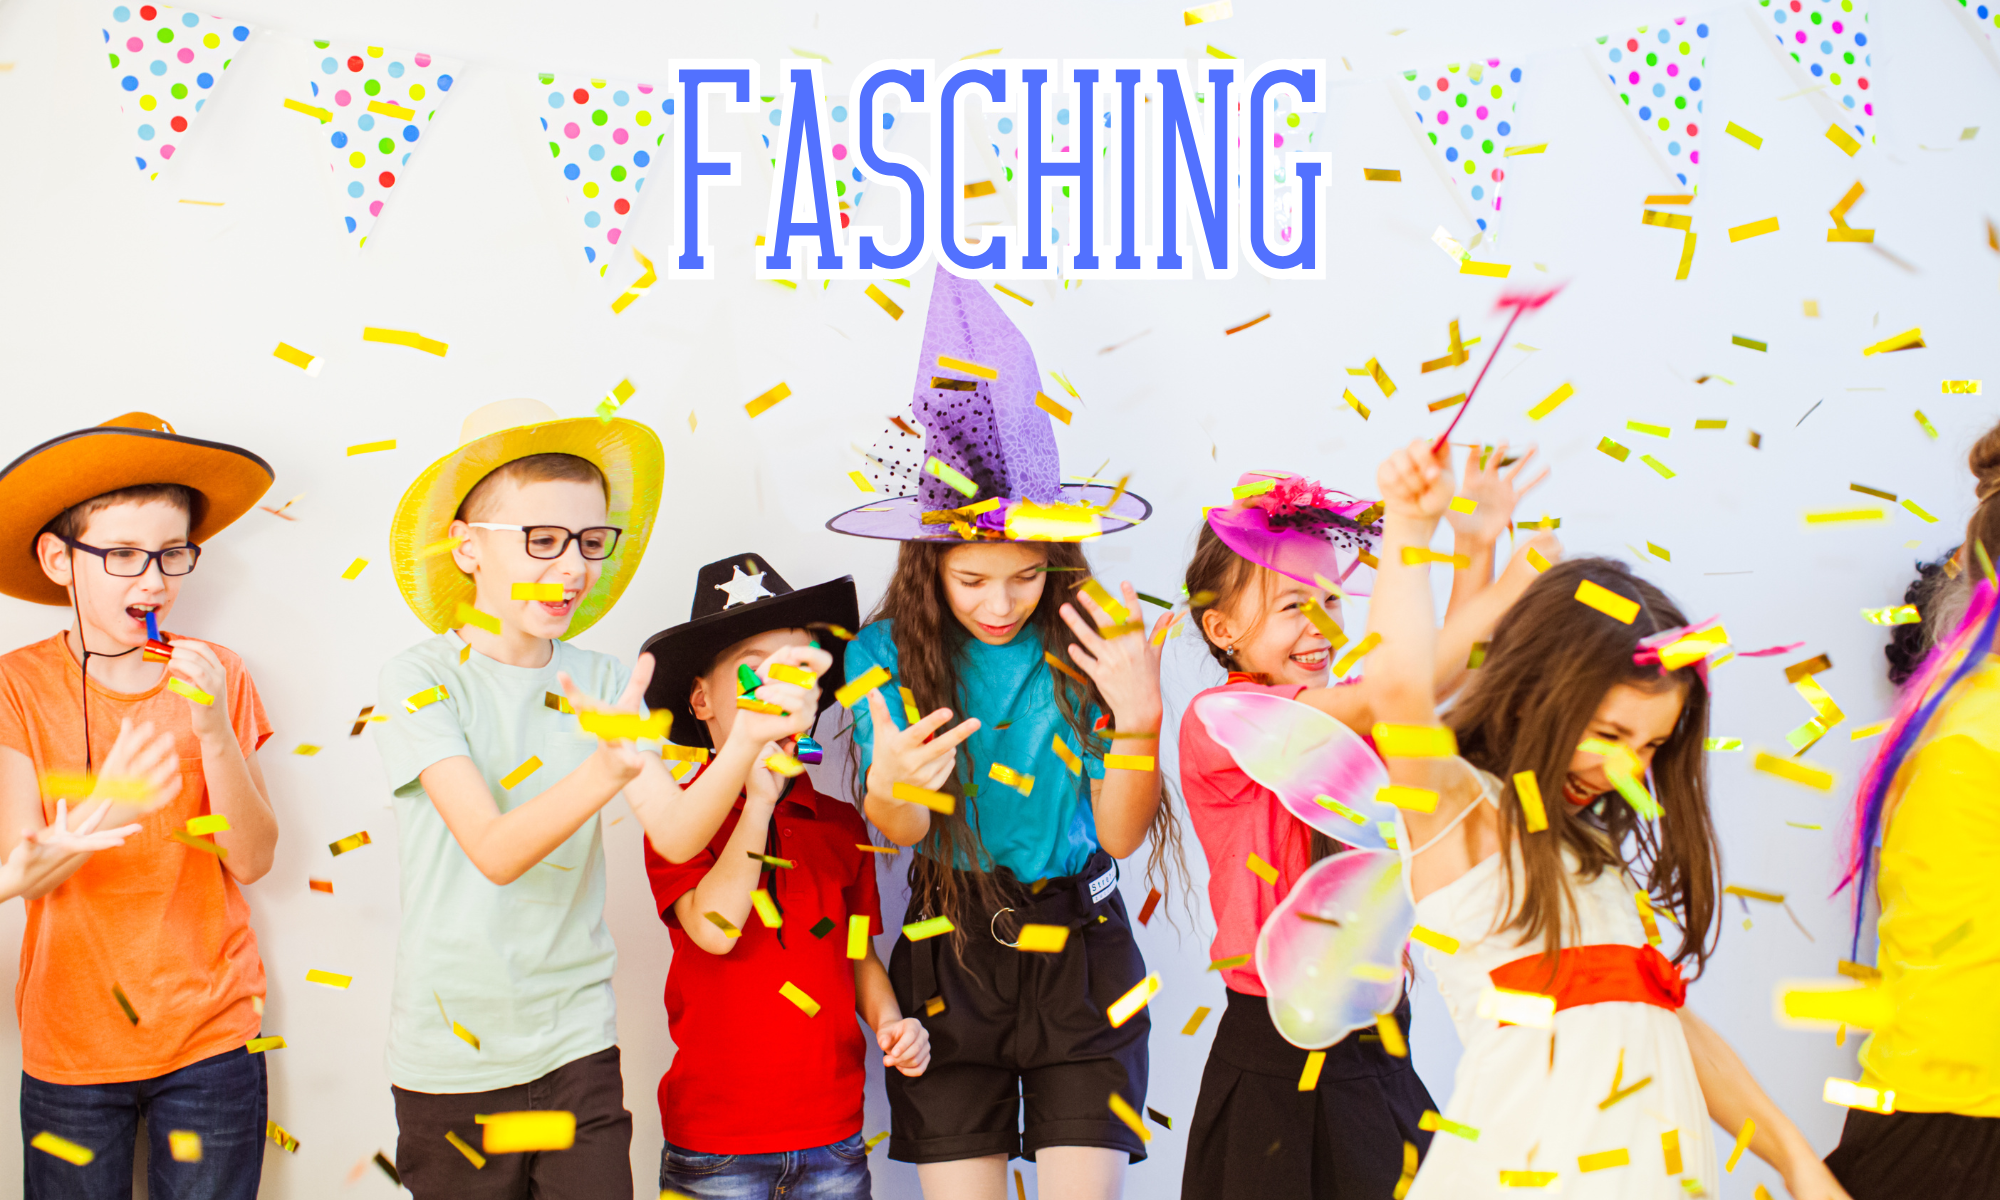 Fasching Fun: A Festive Guide to Dressing Up